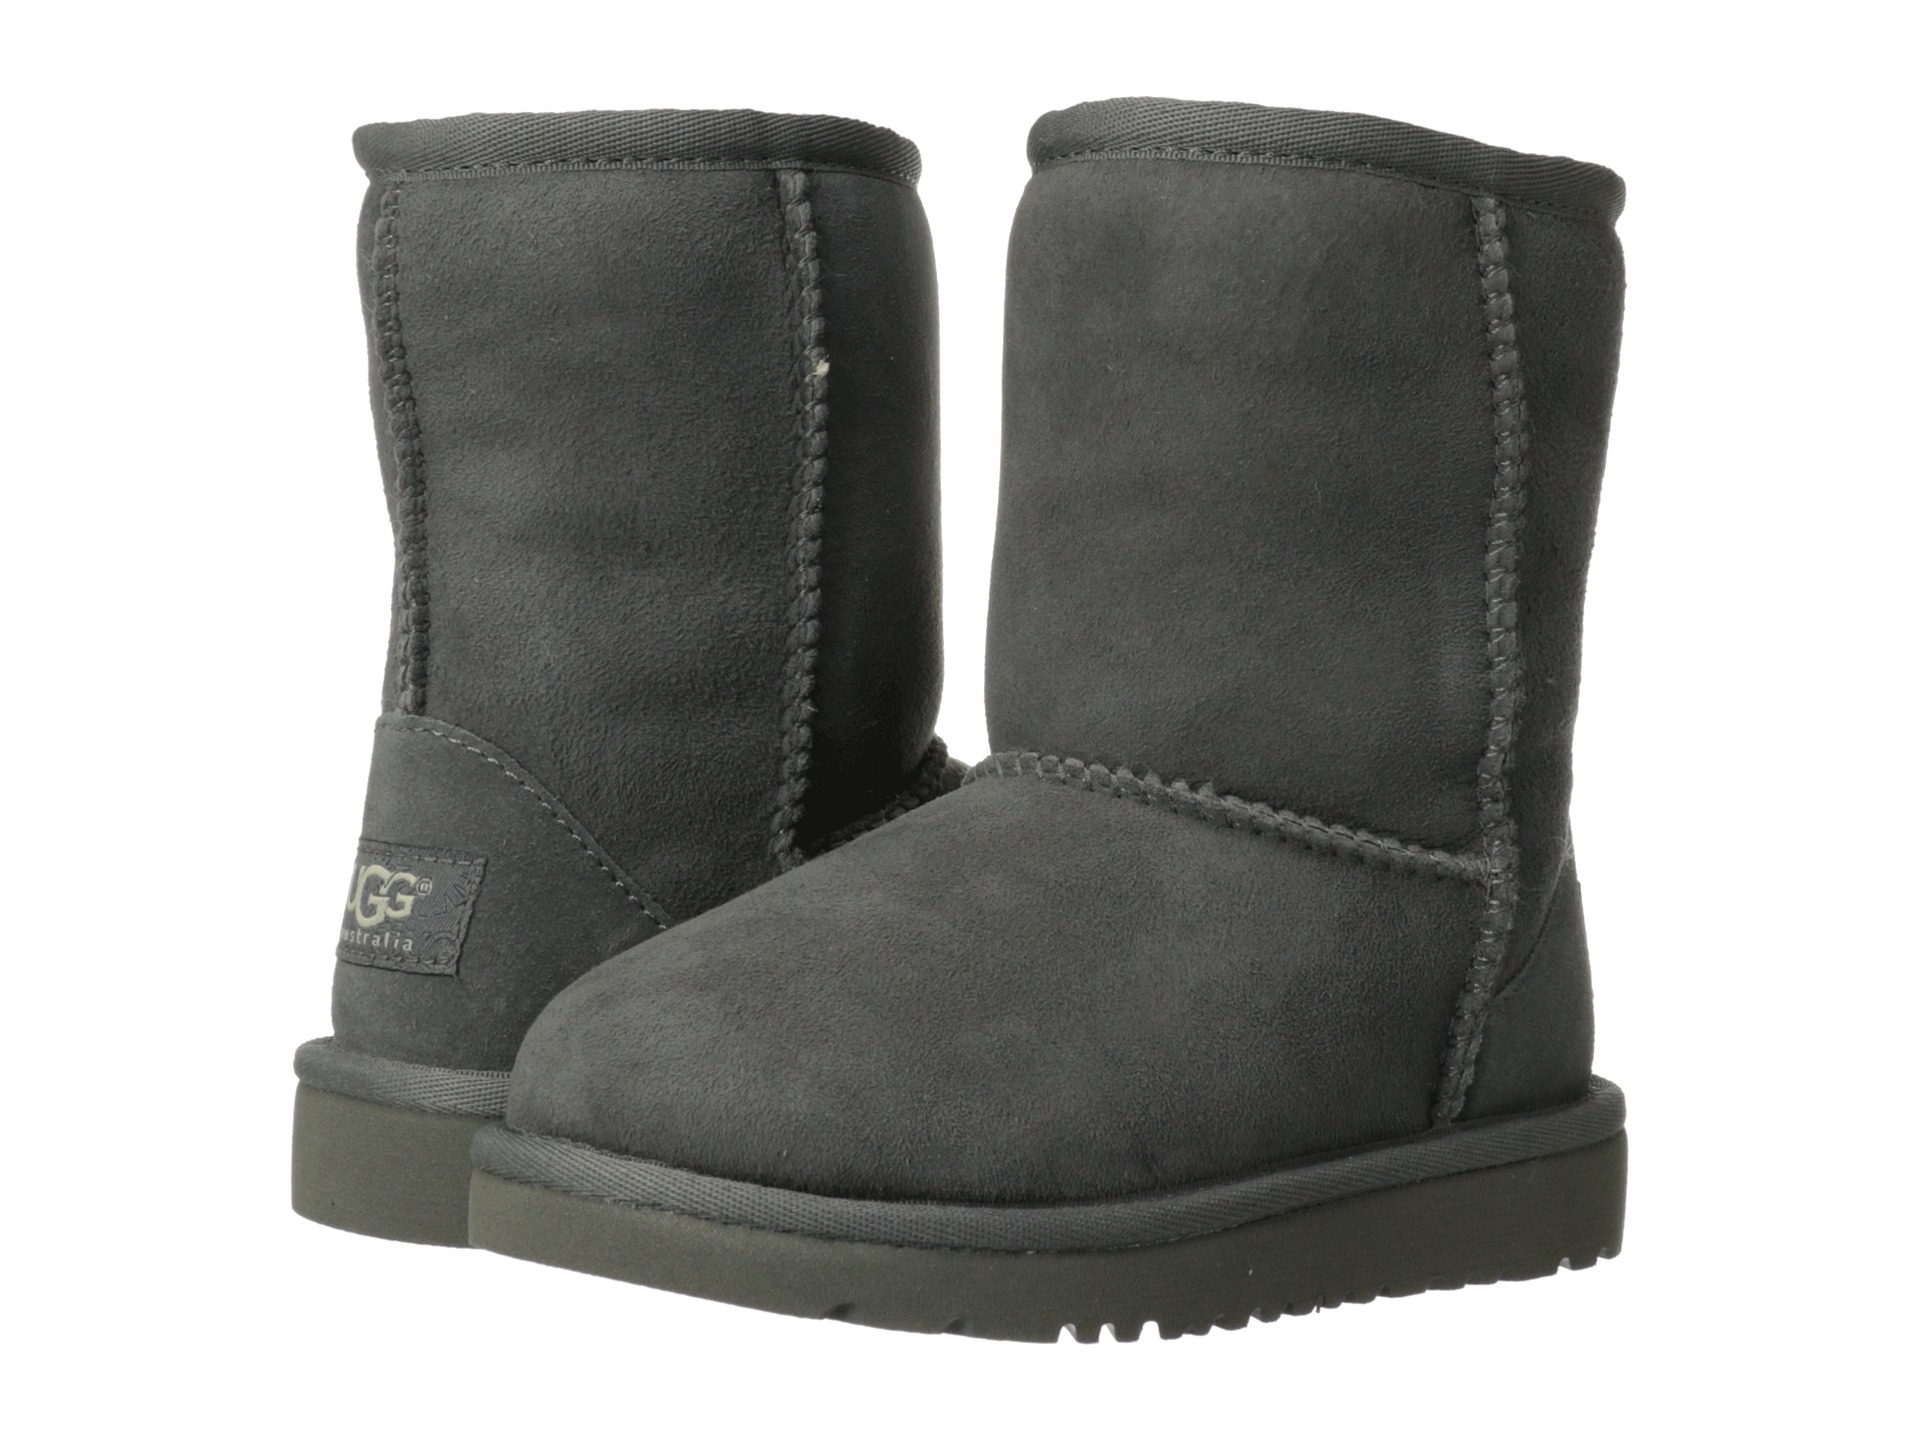 UGG Kids Classic (Toddler/Little Kid) at Zappos.com